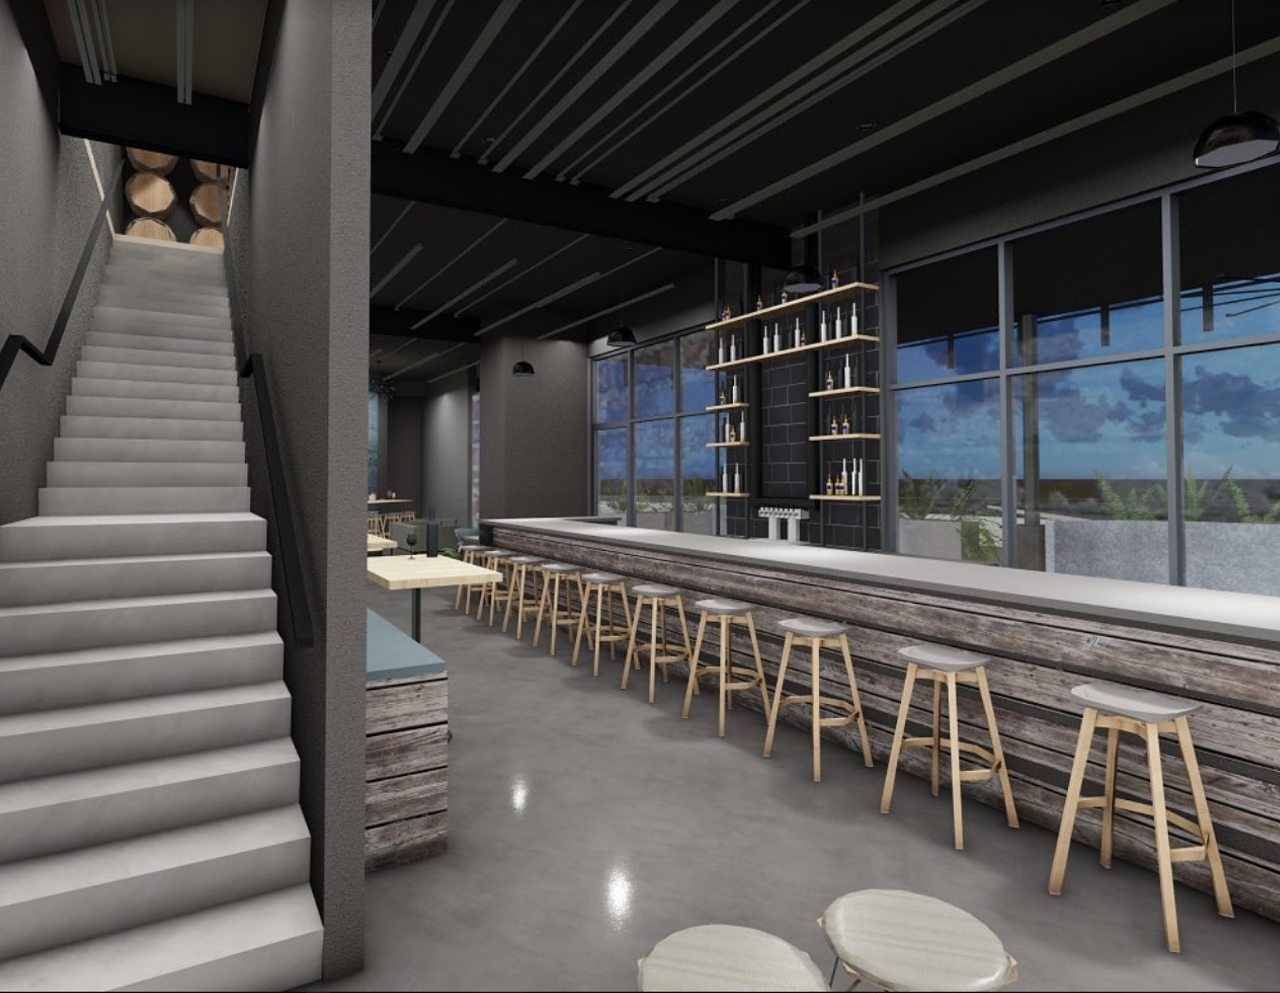 Conversa Elevated
20327 W. Interstate 10, conversaelevated.com
The dual-level bar will adhere to two dress codes: “smart casual” on the first level and cocktail attire on the second level. The two-story bar is expected to open near San Antonio’s exclusive Dominion neighborhood in March.
Photo via Instagram / conversaelevated